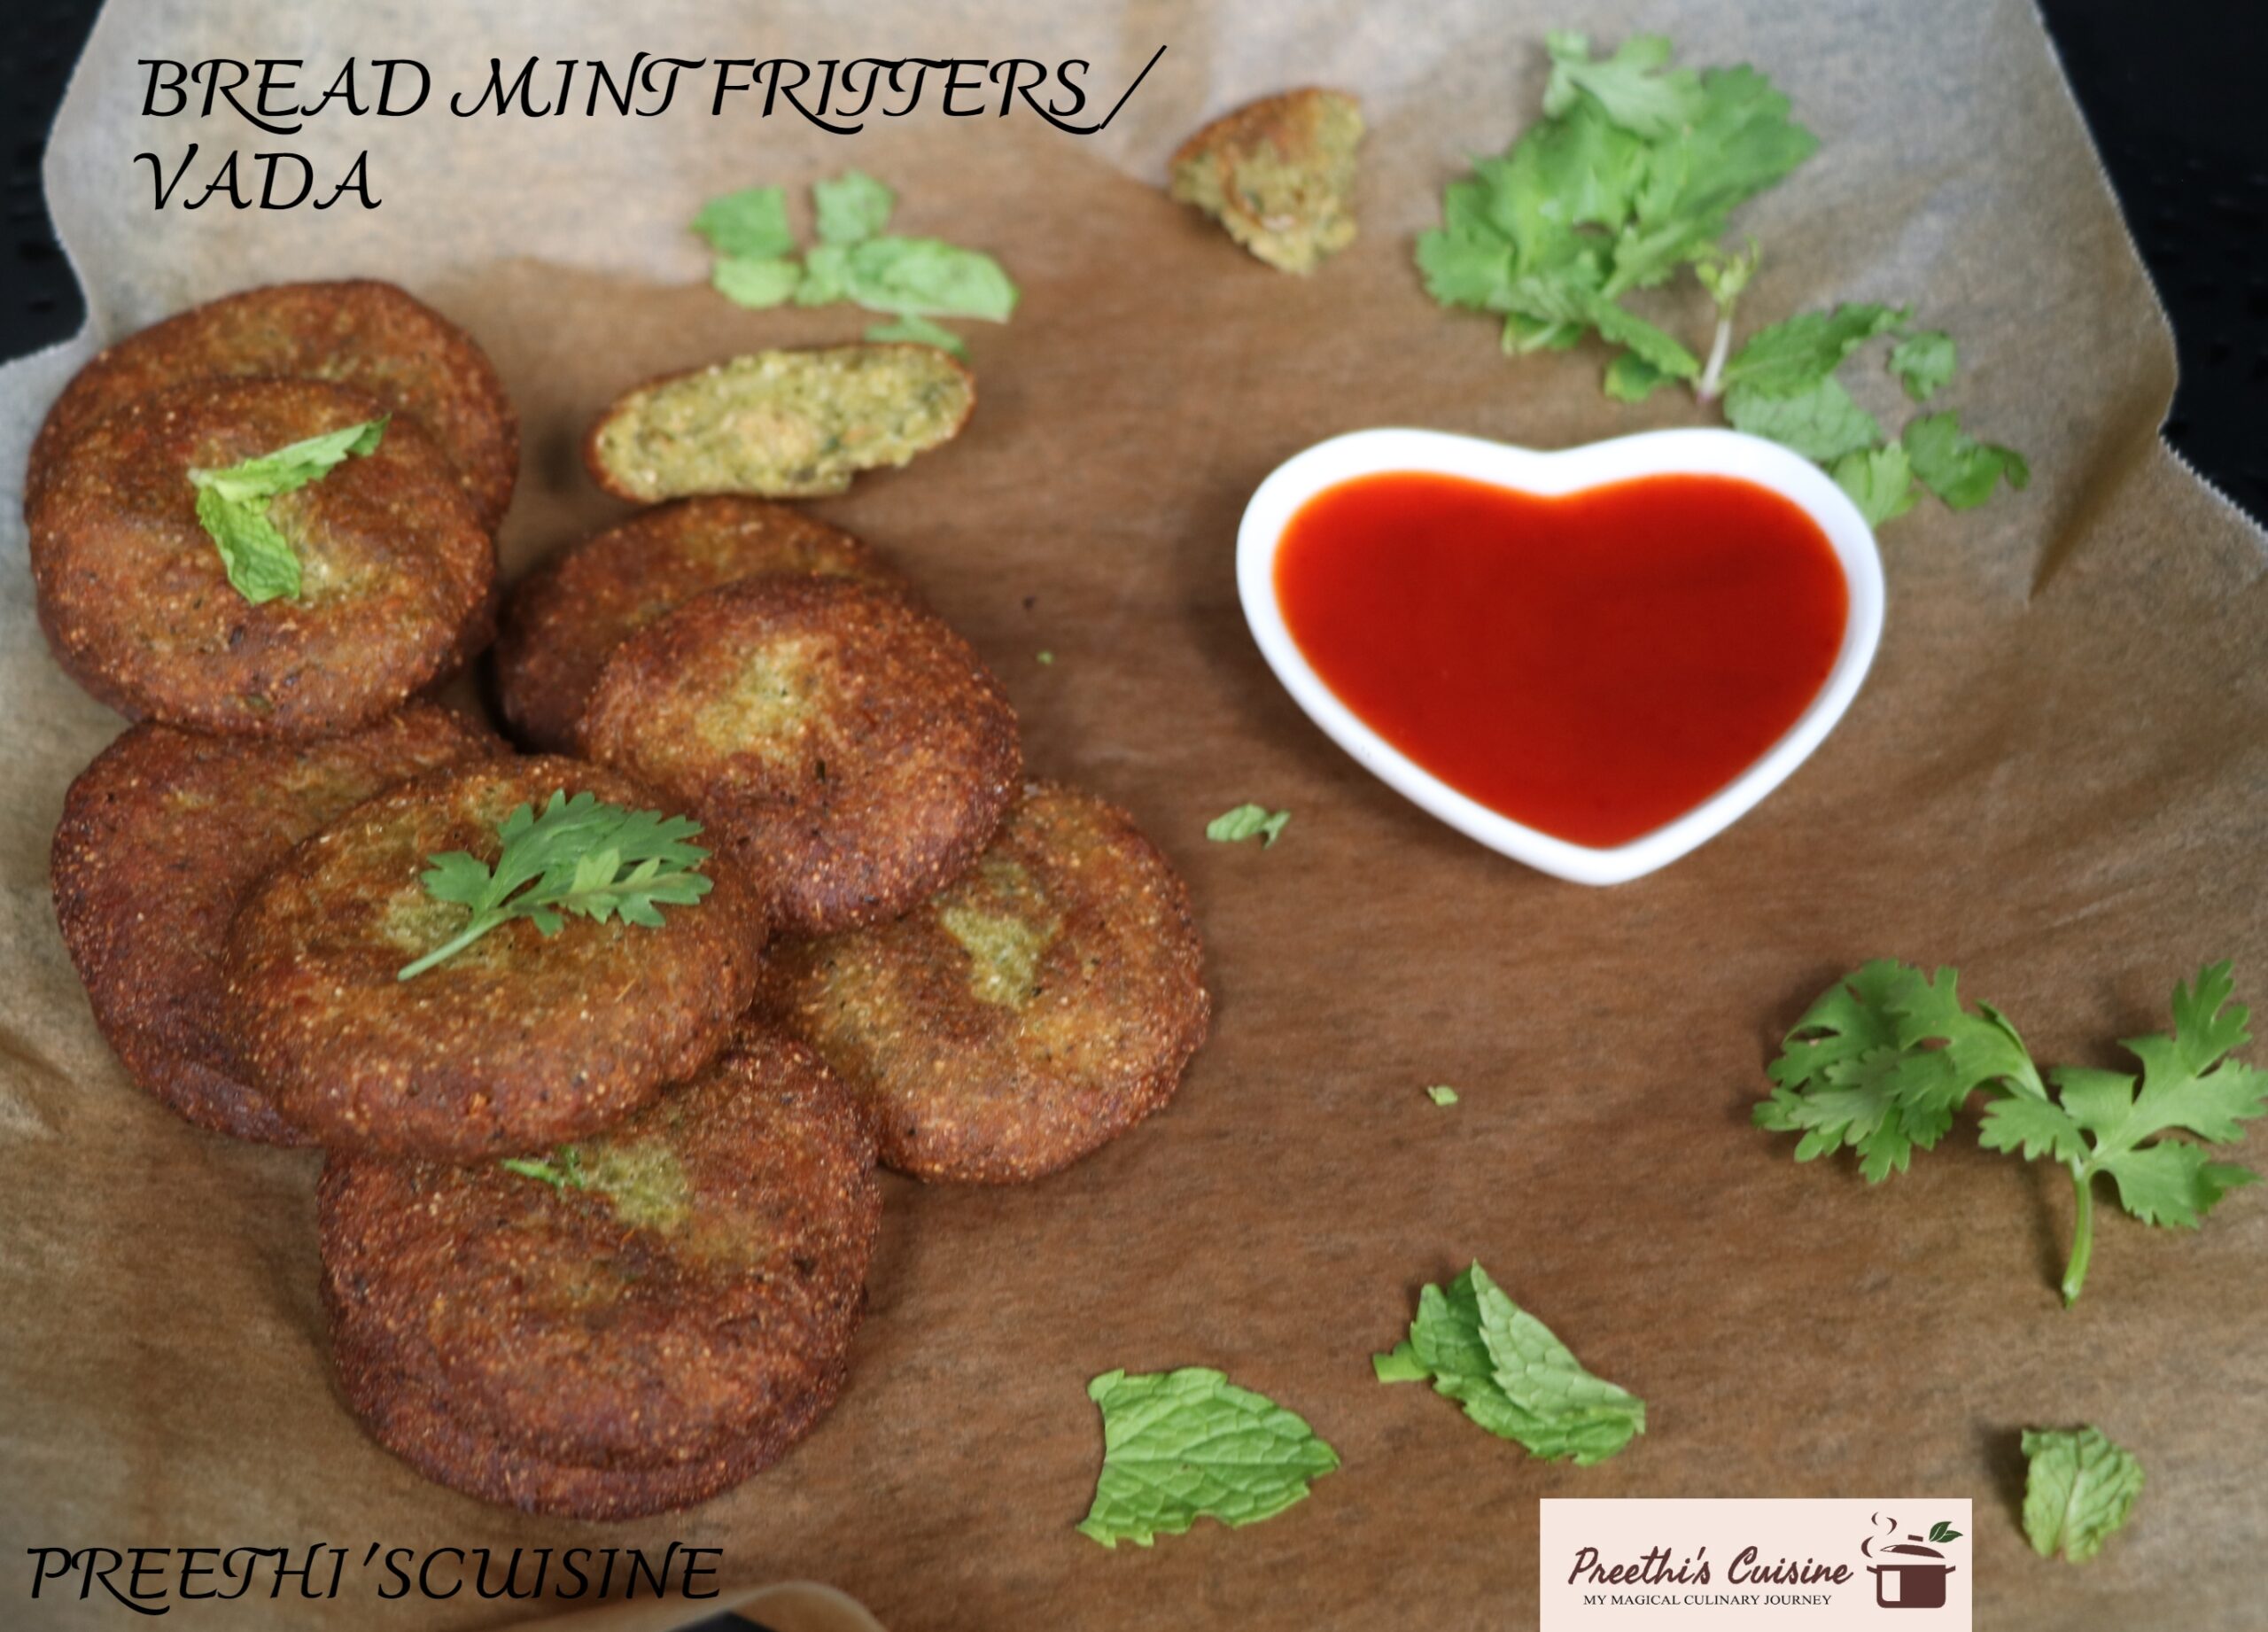 BREAD MINT FRITTERS / VADA